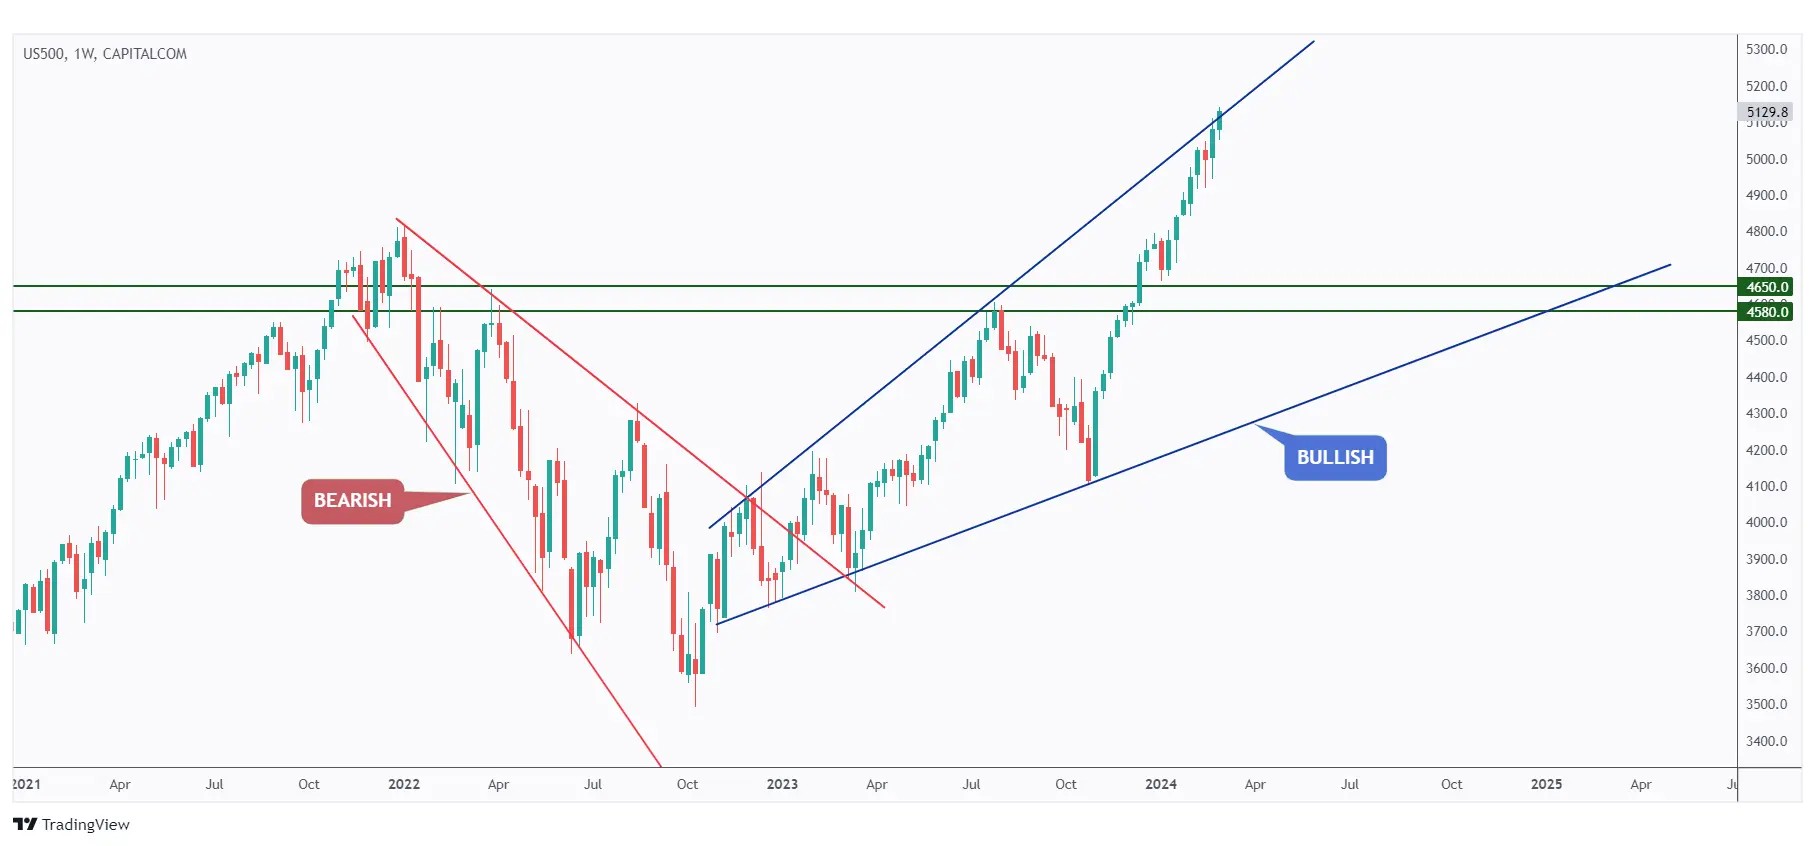 US500 weekly chart is still hovering around the upper bound of the rising wedge pattern.